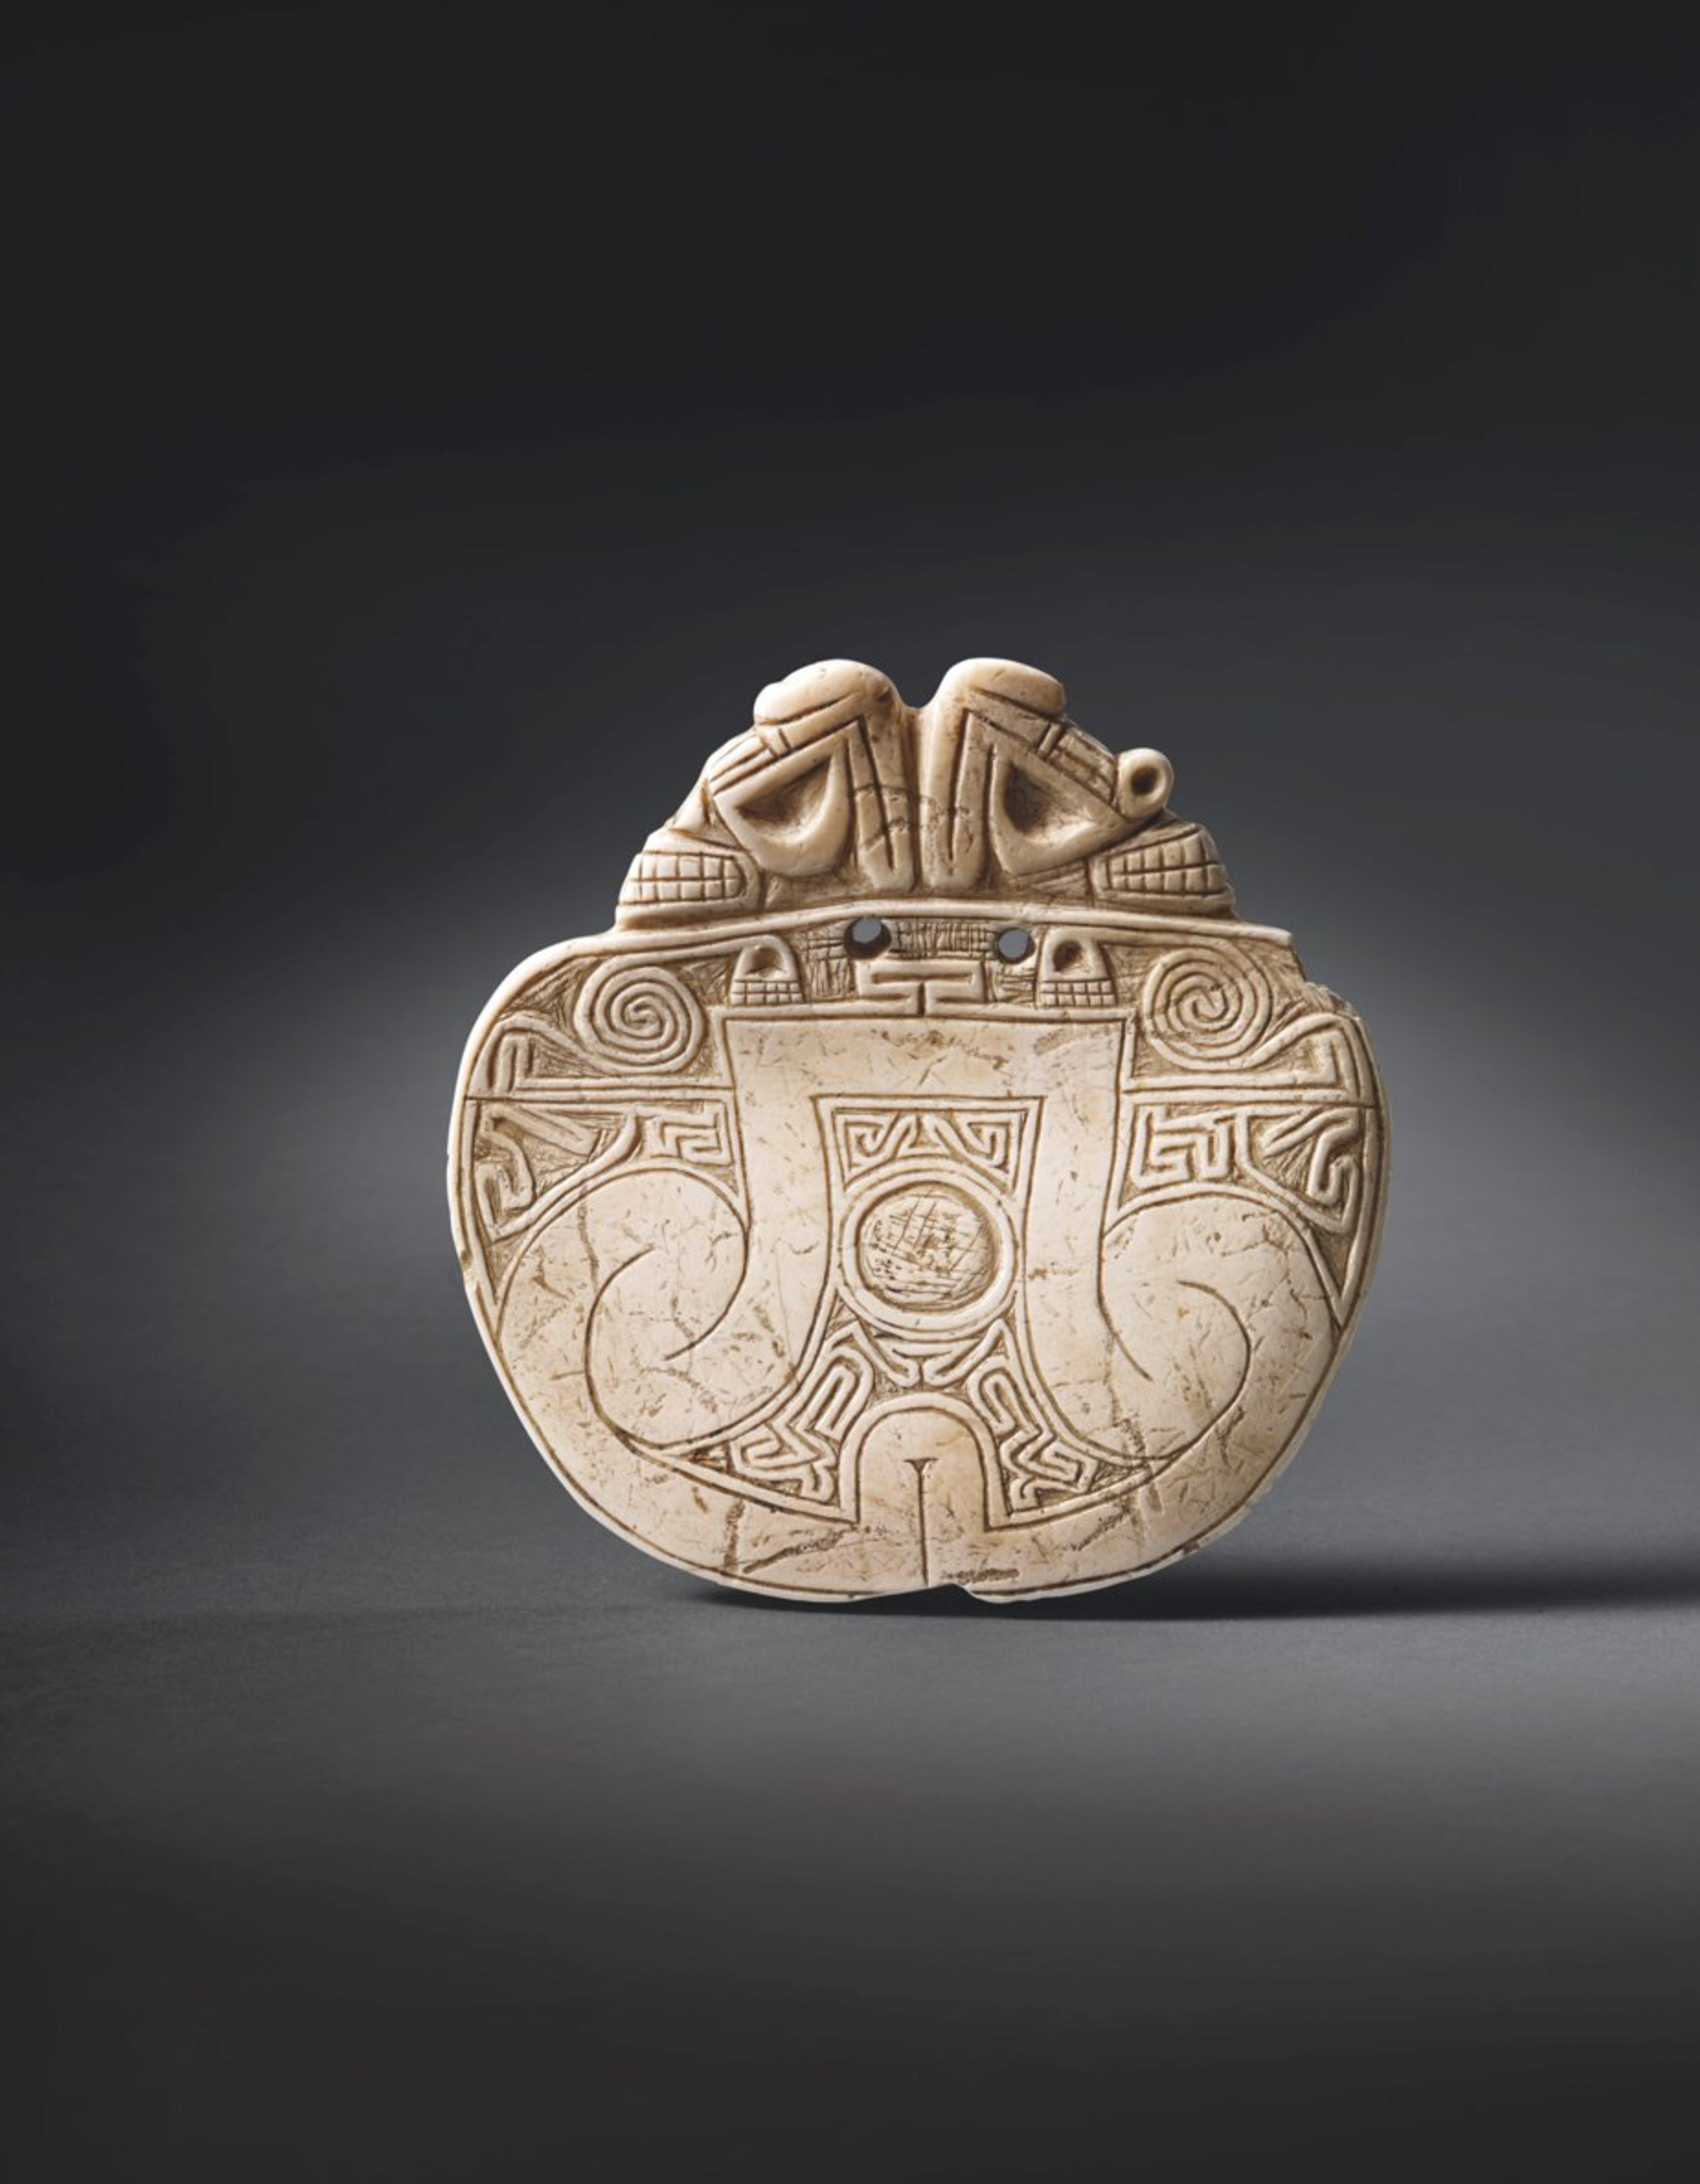 This Taino pendant being auctioned at Christie's has an estimate of €135,000-€180,000 Courtesy: Christie's